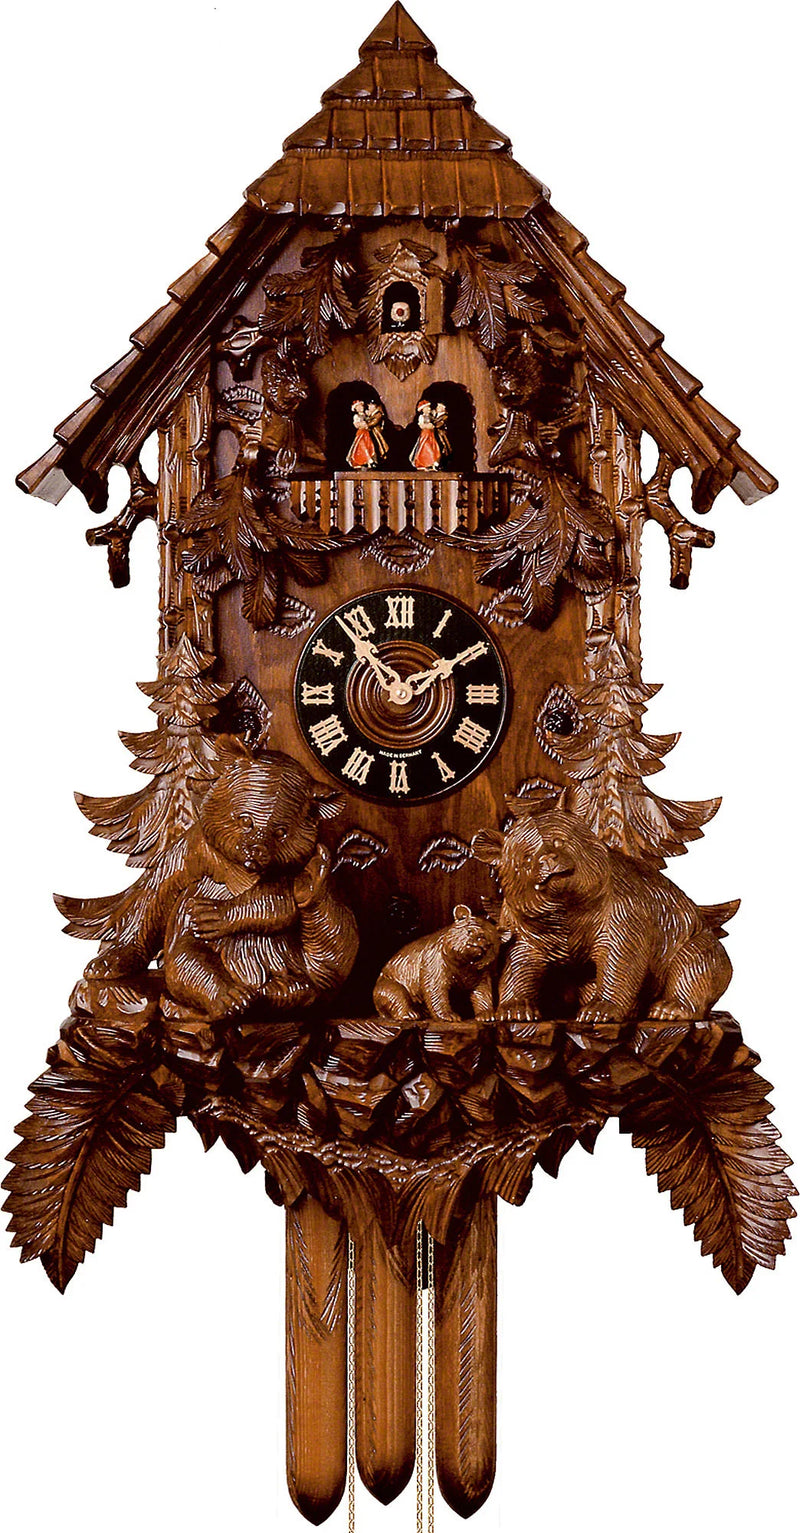 KU82528M - 8 Day Musical Chalet w/ Bears Fully Carved